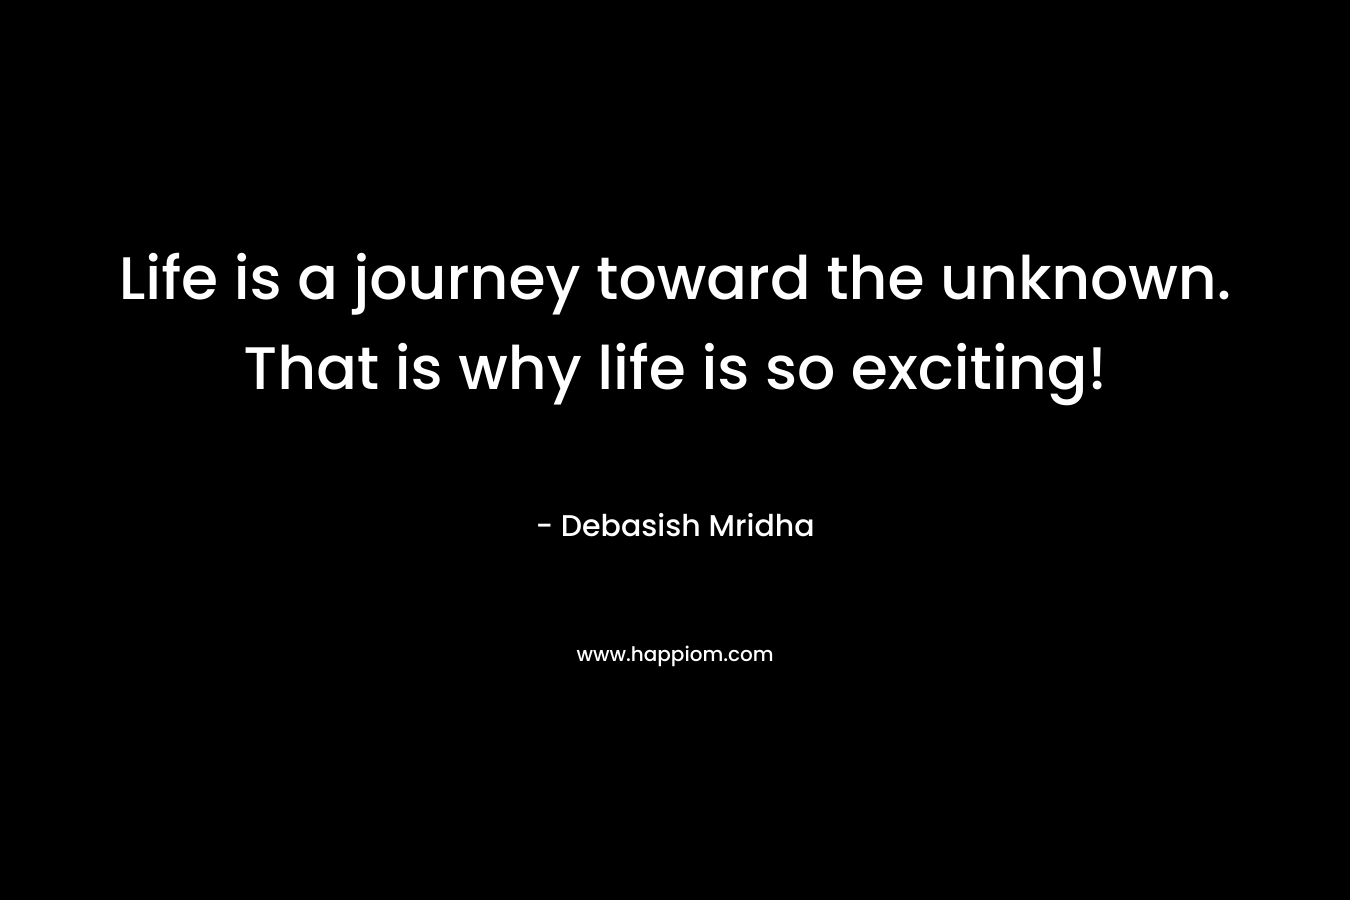 Life is a journey toward the unknown. That is why life is so exciting!